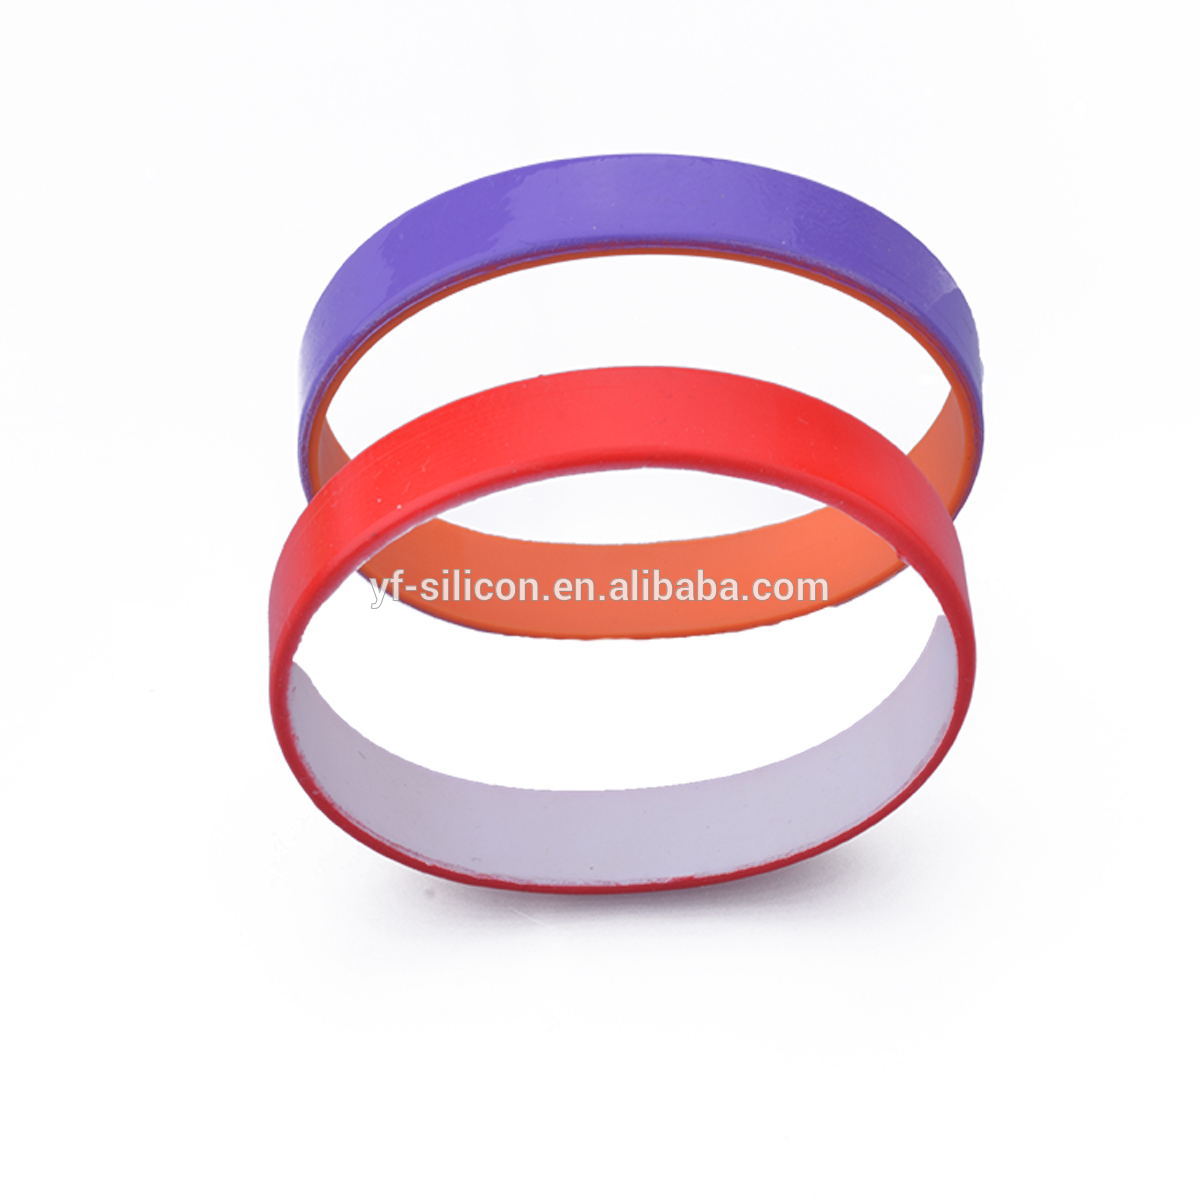 Cute safety silicone wristbands for kids 17